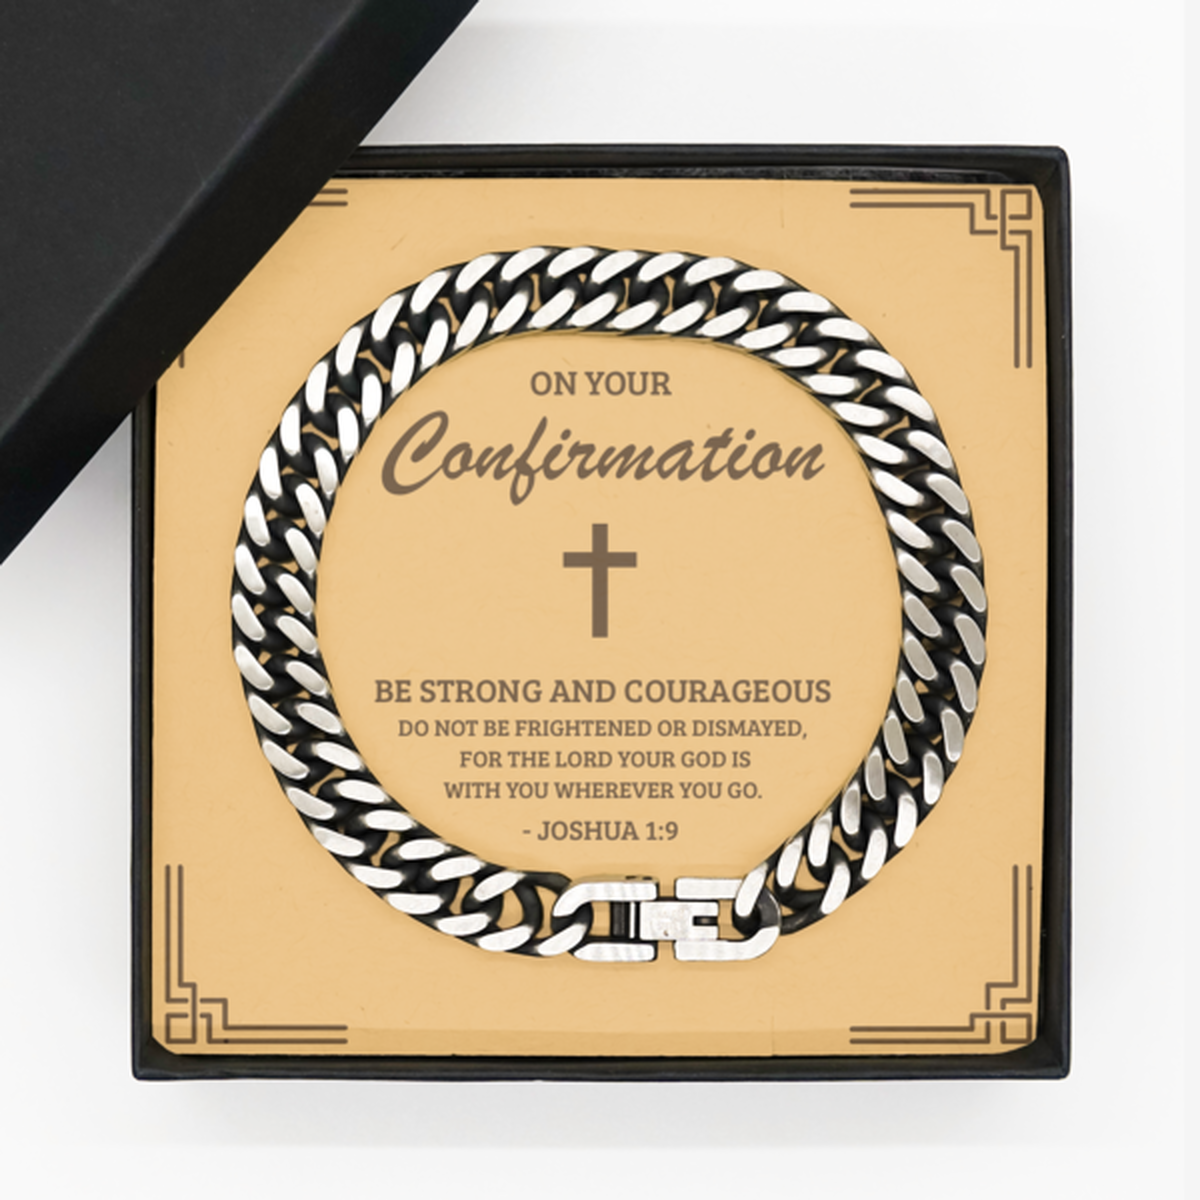 Confirmation Gifts for Teenage Boys, Be strong and courageous, Cuban Link Chain Bracelet with Bible Verse Message Card, Religious Catholic Bracelet for Son, Grandson, Dad, Godfather